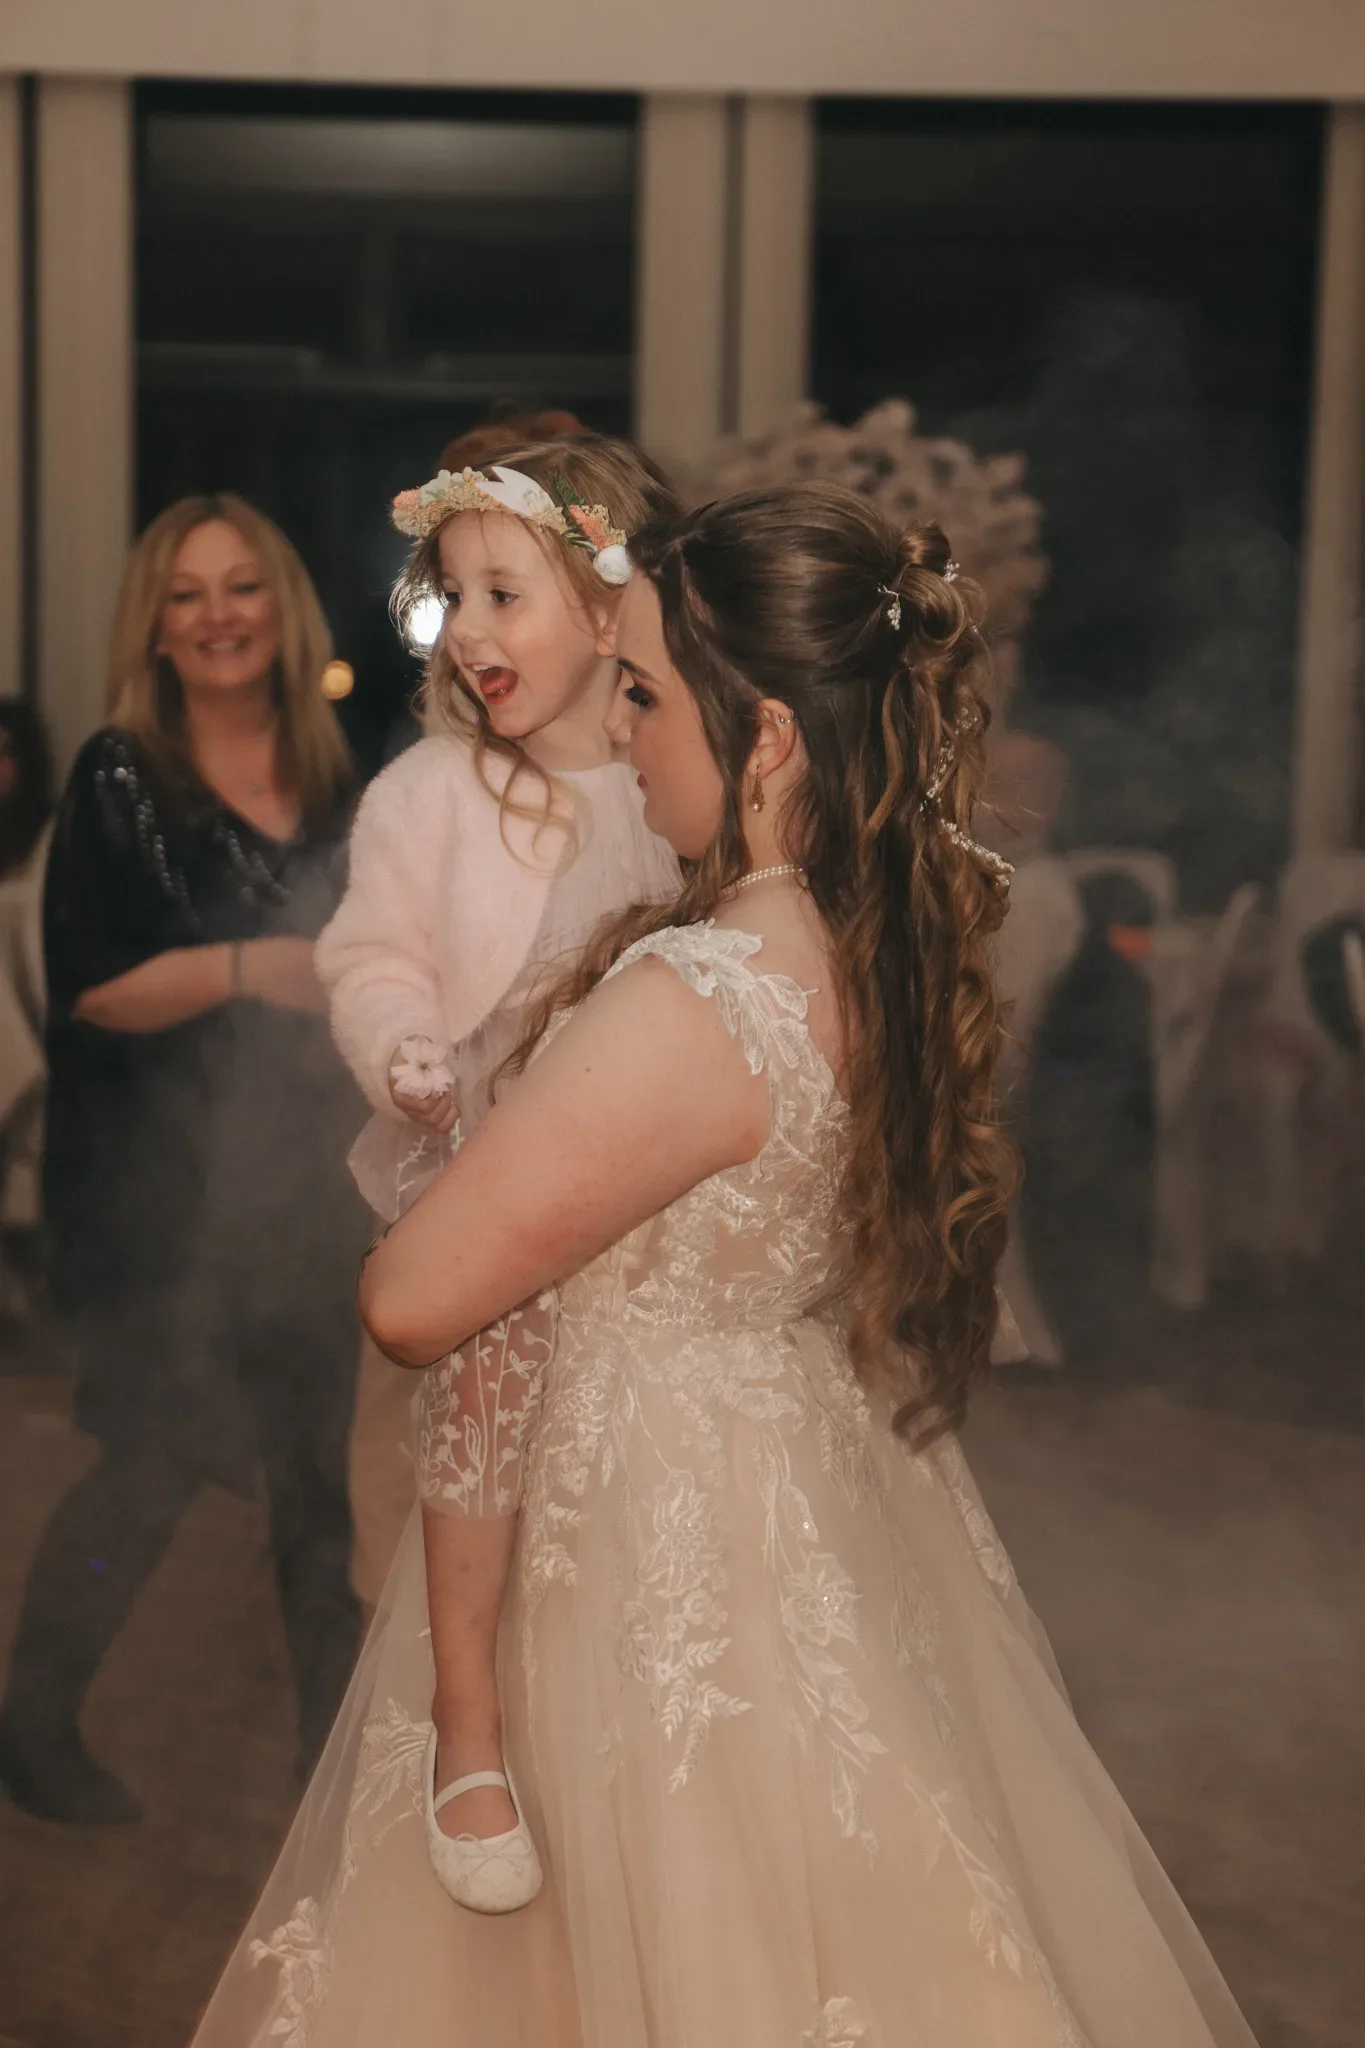 A woman in a lace wedding dress holds a young girl wearing a white dress and floral headband. they are surrounded by guests in a dimly lit room with visible joy and celebration.